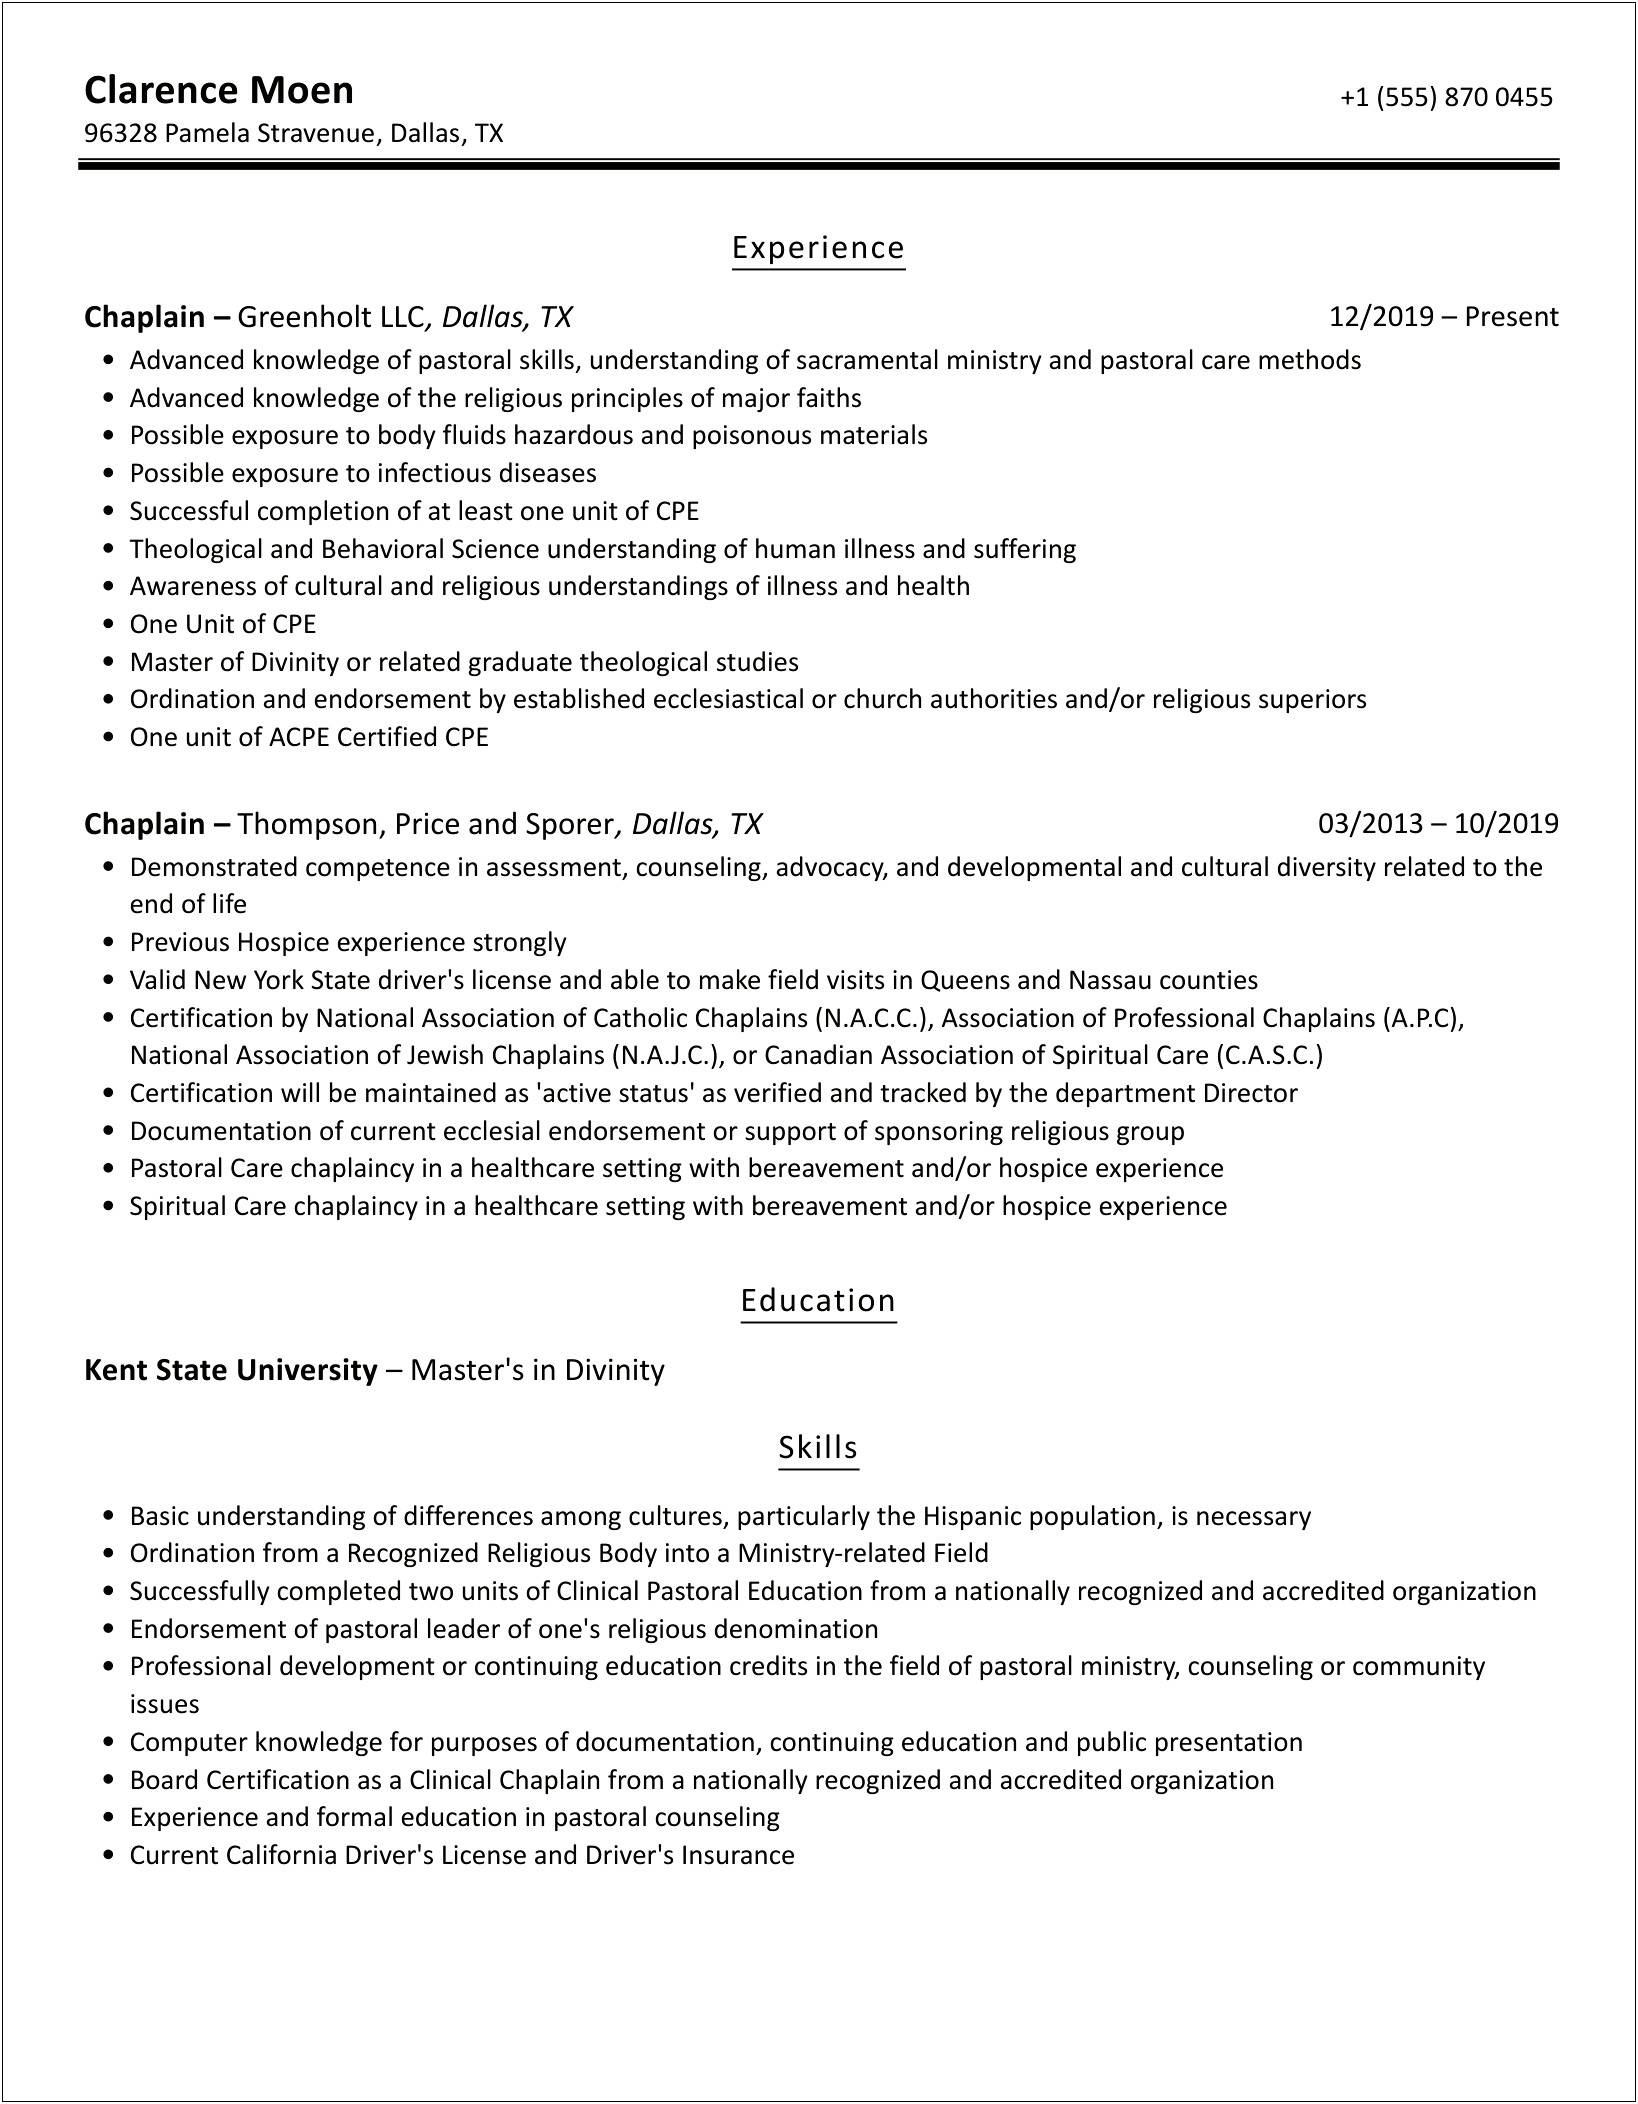 Resume Objective For Cpe Chaplain Internship Position